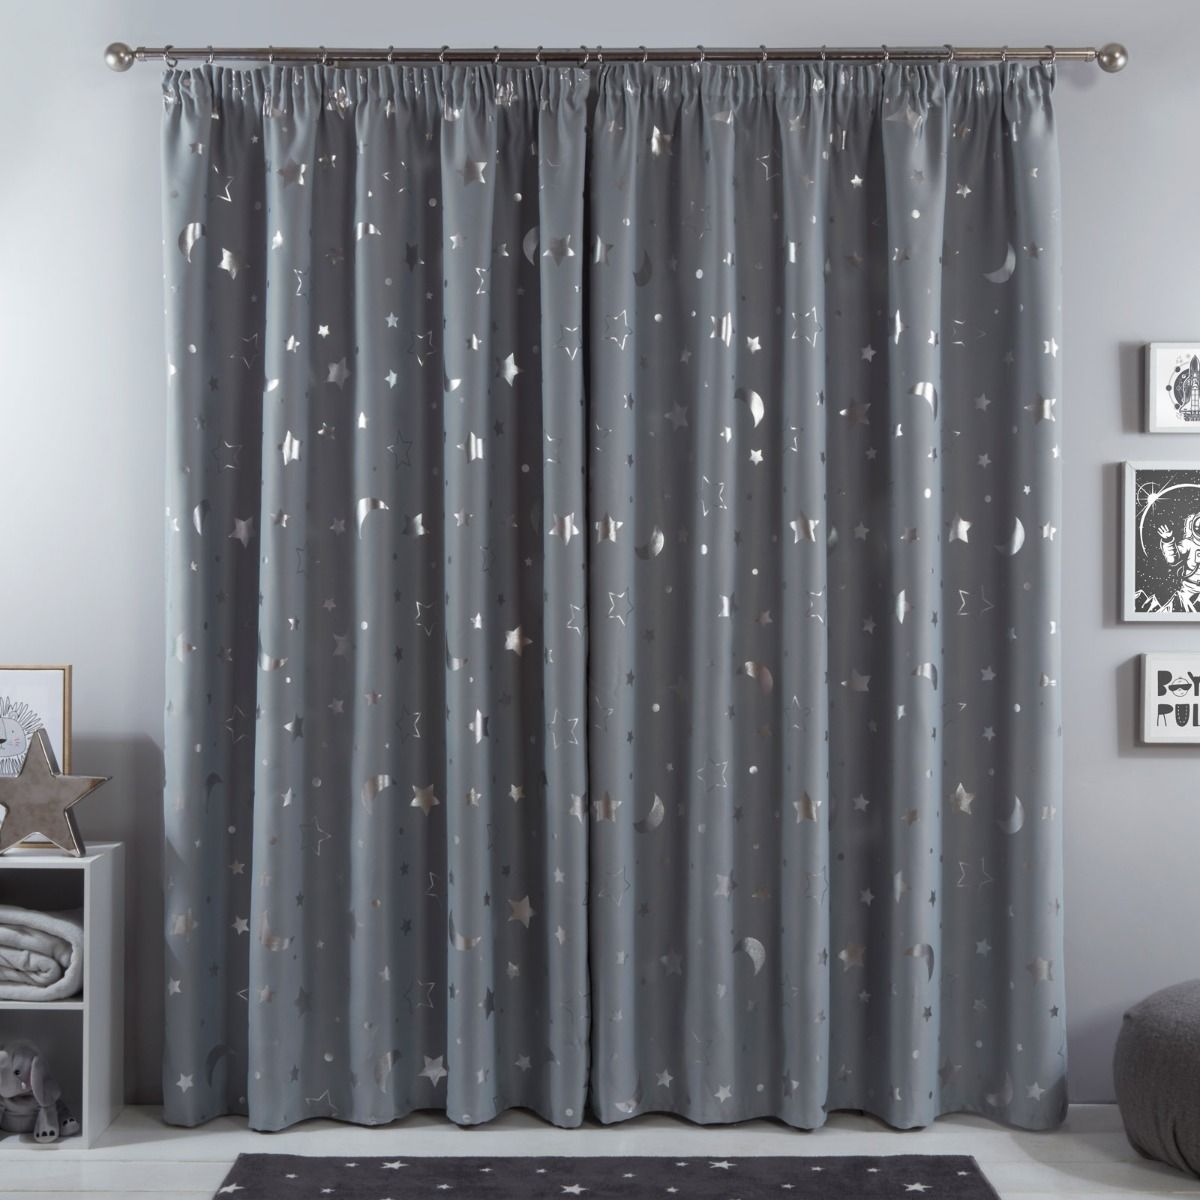 Dreamscene Pencil Pleat Blackout Curtains Set of 2 Thermal Tape Top Heading Panels Ready Made Width 46 x Drop 54 Charcoal Grey 